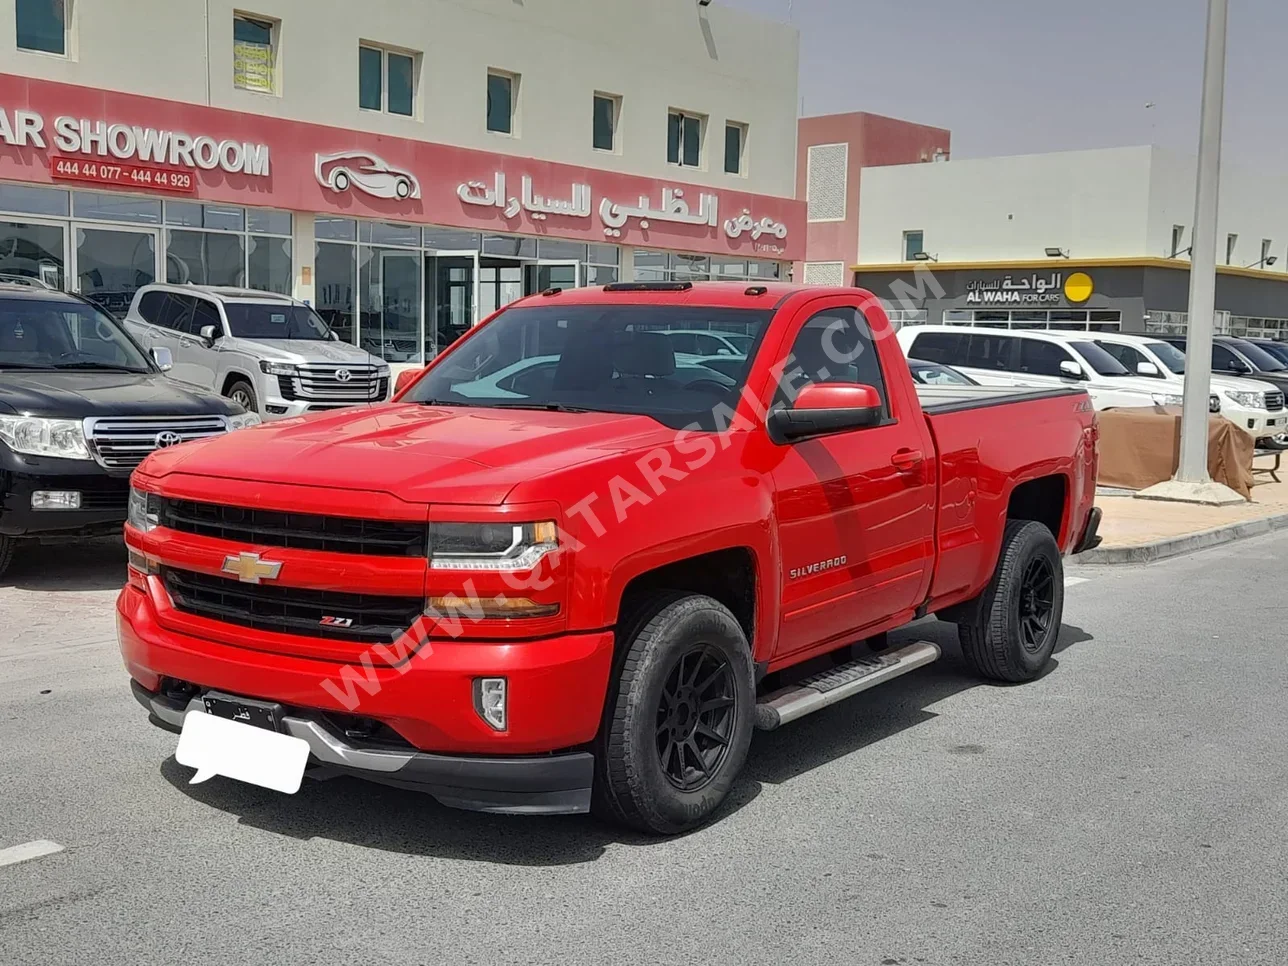 Chevrolet  Silverado  LT  2018  Automatic  179,000 Km  8 Cylinder  Four Wheel Drive (4WD)  Pick Up  Red